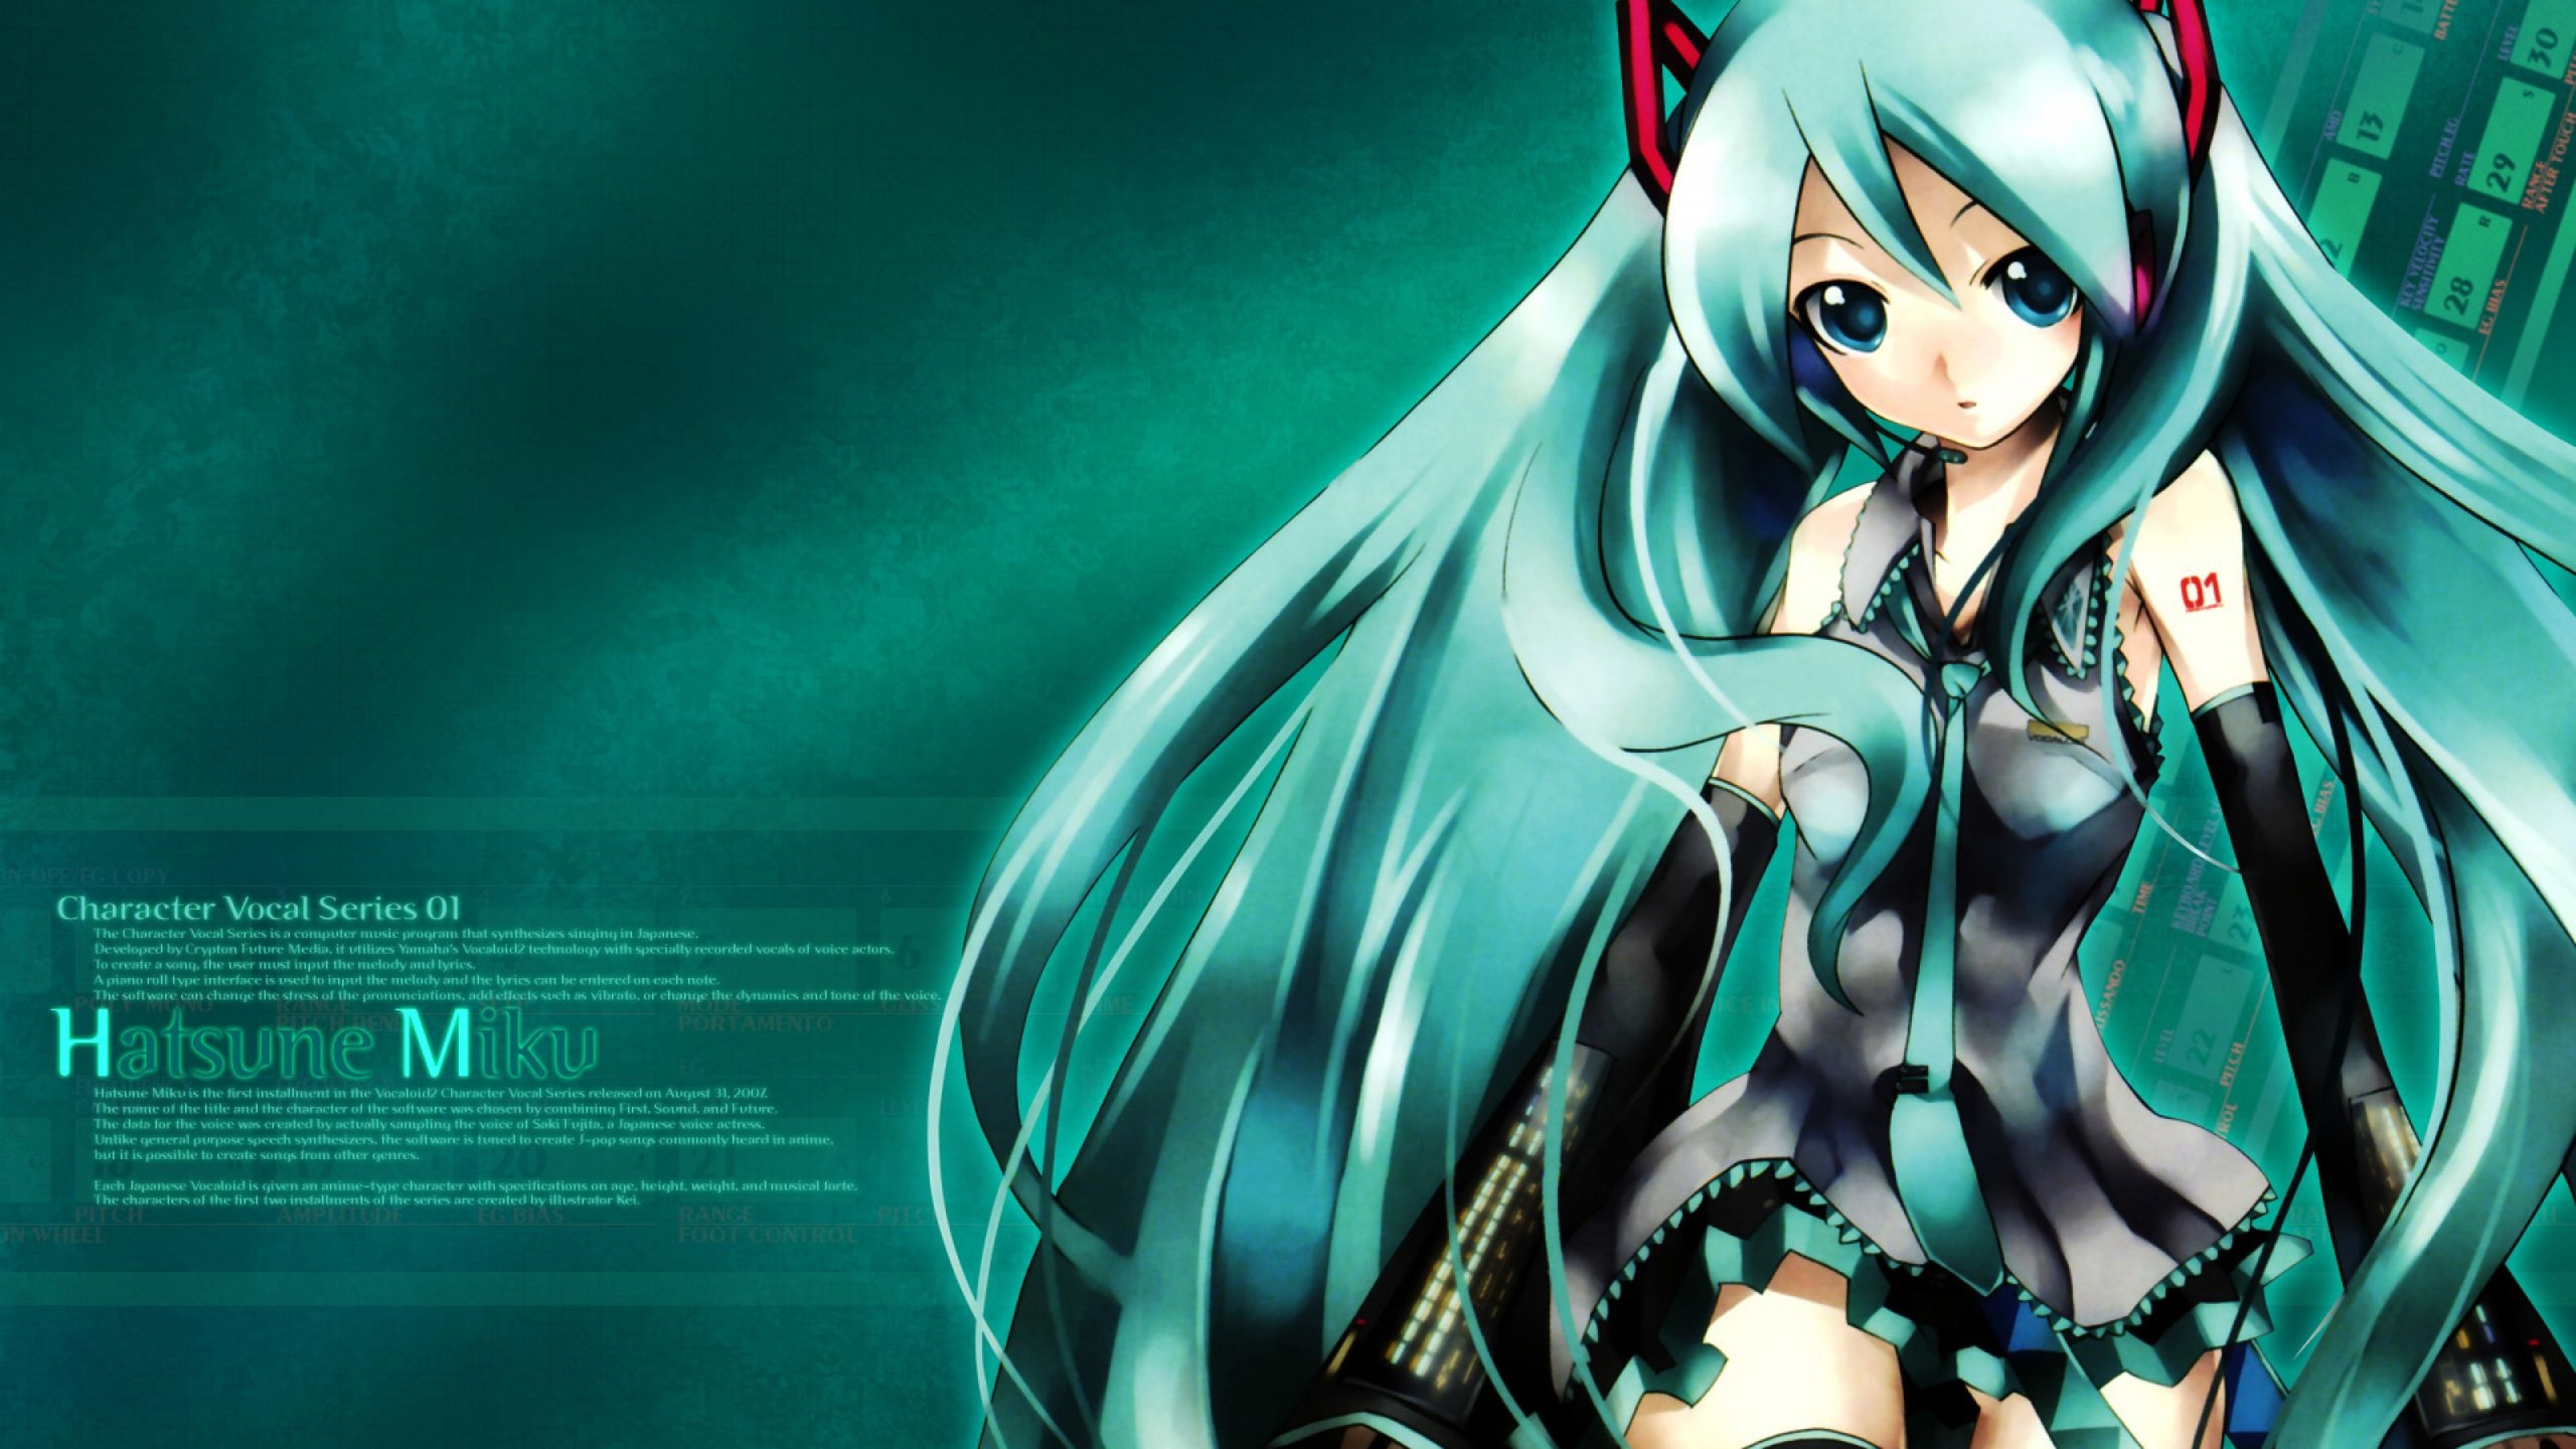 3840x2160 Awesome and Cool Miku Hatsune wallpaper available on Google Chrome theme  maker available on my account